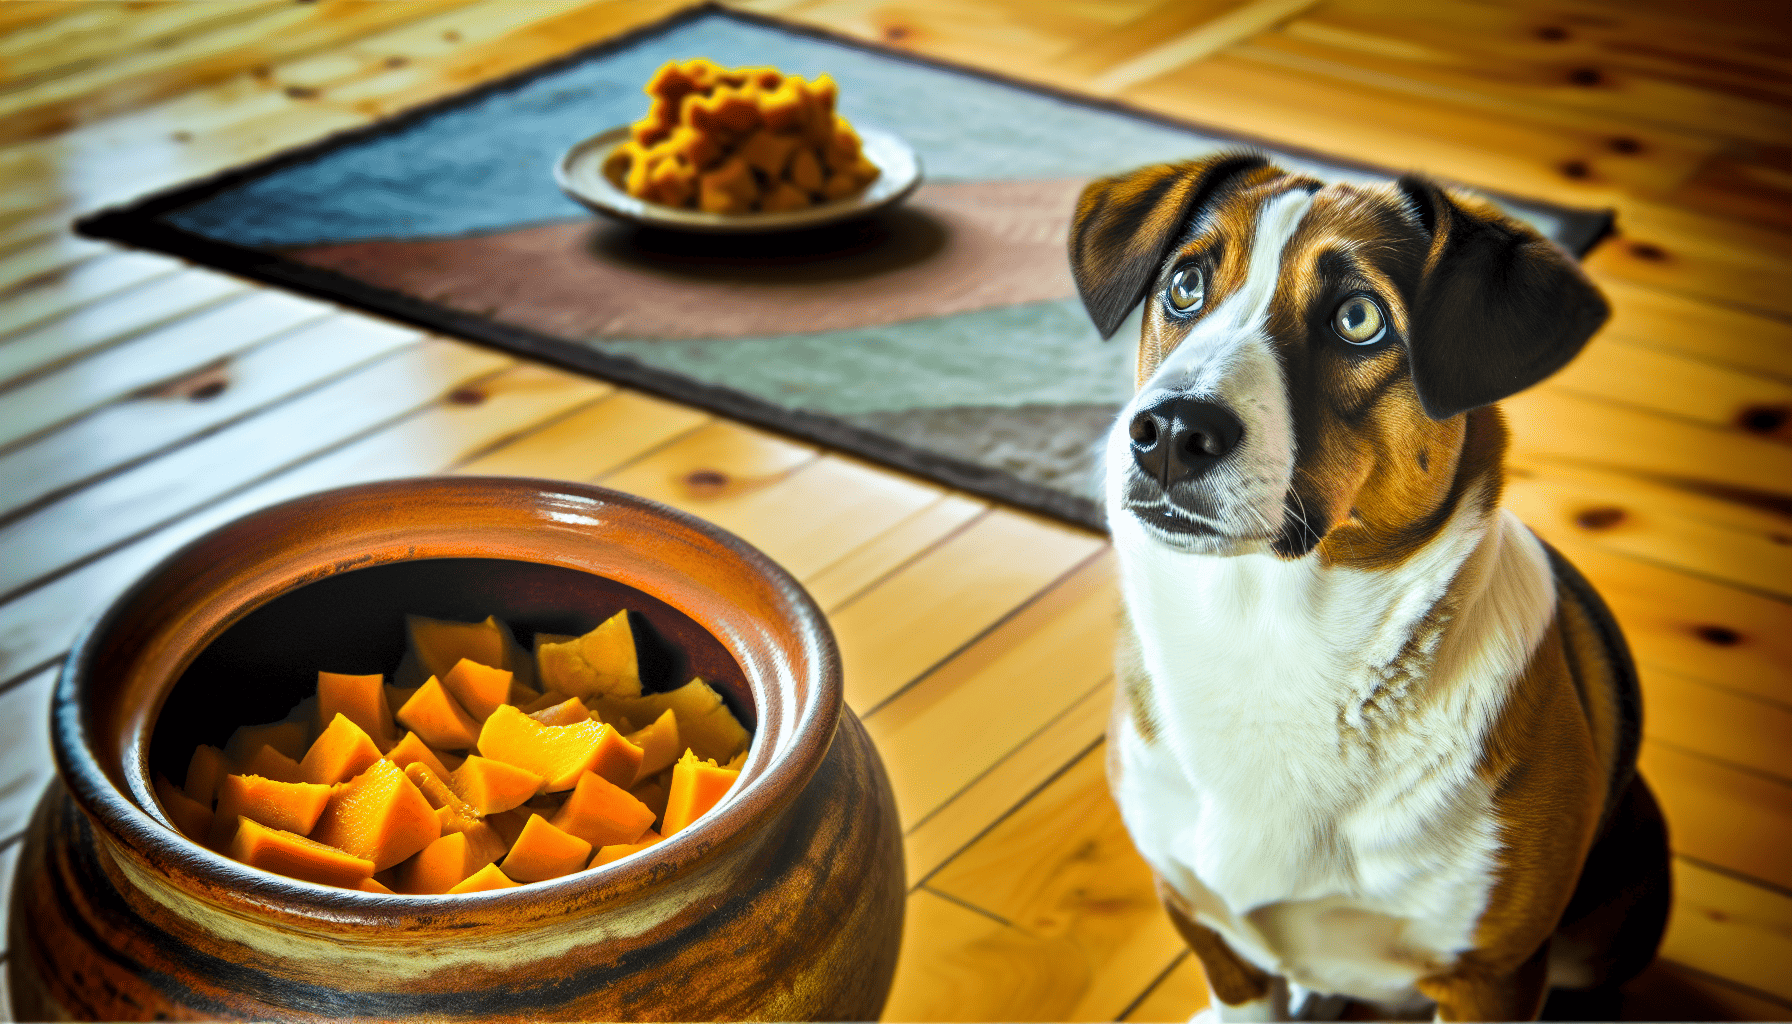 A dog looking at a bowl of cooked butternut squash